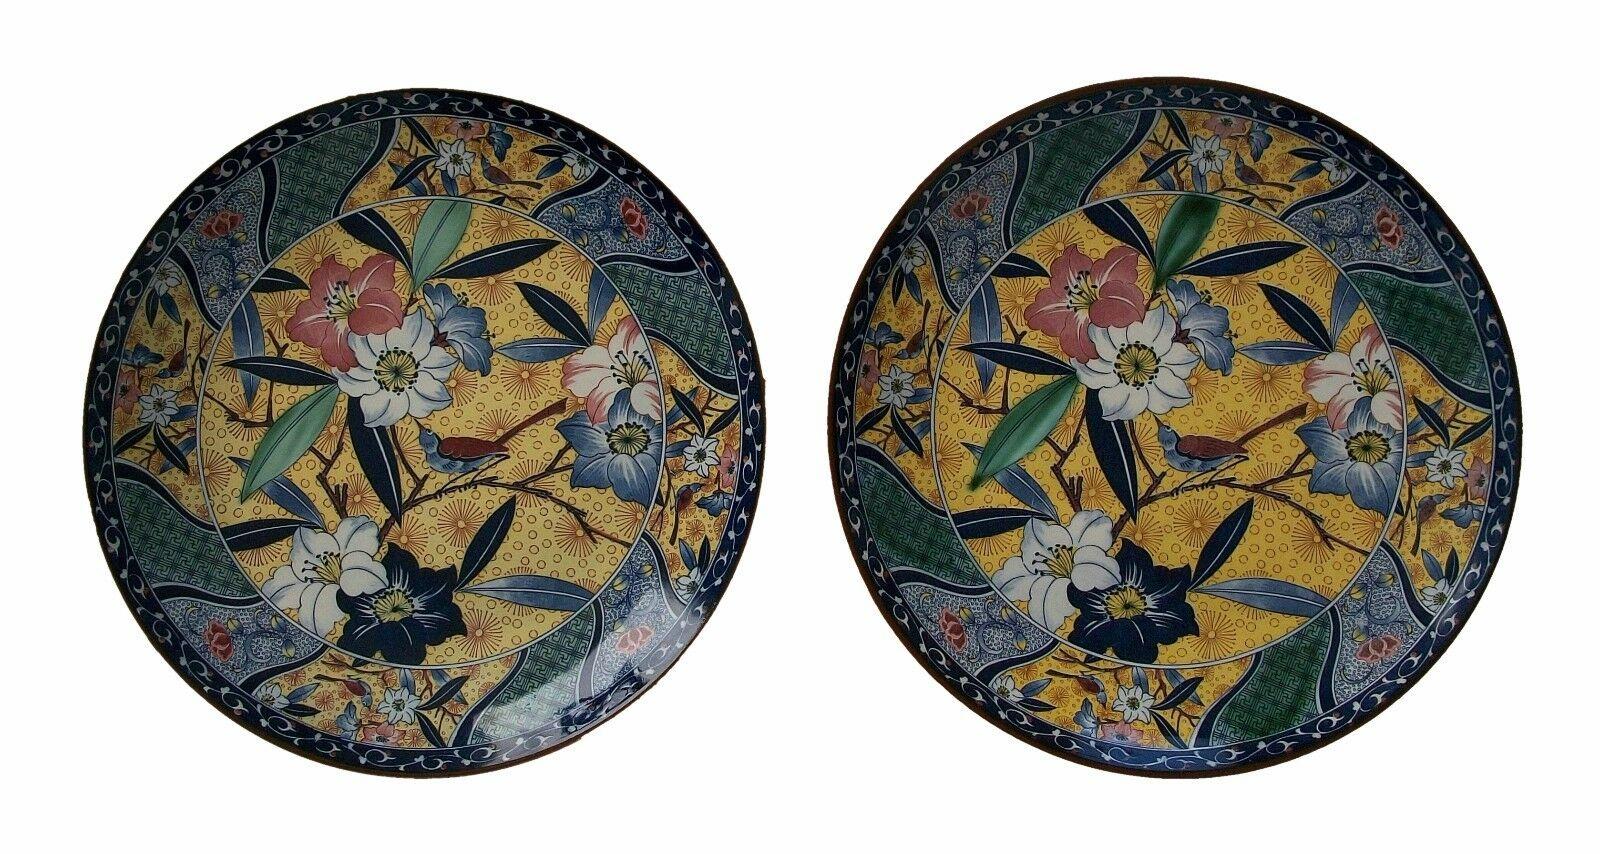 Vintage pair of Arts & Crafts / Aesthetic style transfer decorated chargers - hand painted highlights - large size - signed - Japan - mid 20th century.

Excellent vintage condition - no loss - no damage - no restoration - slight color variations -